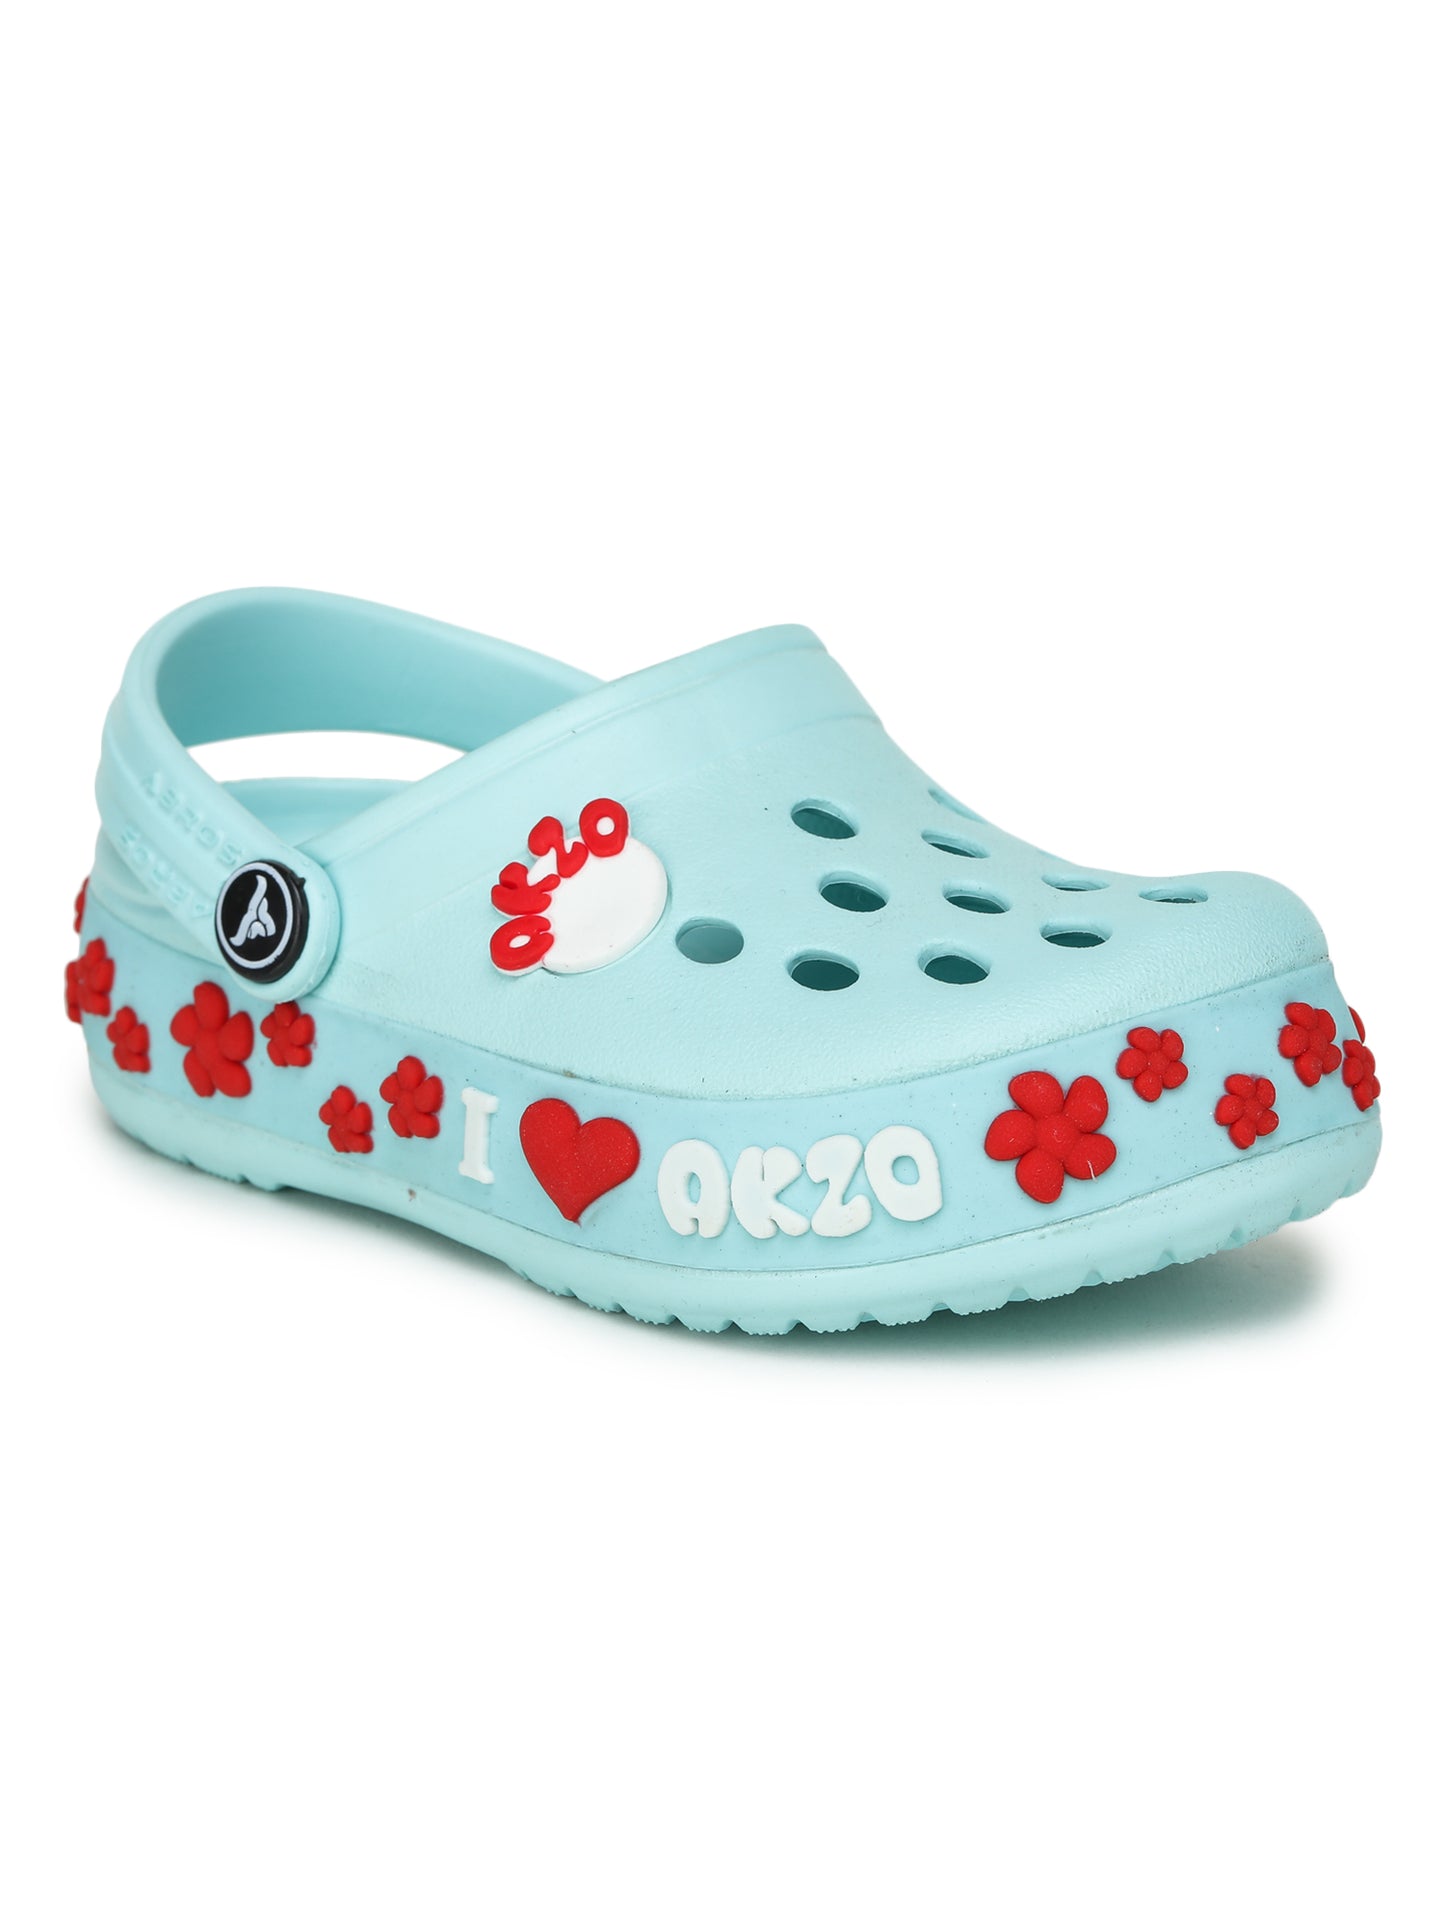 ABROS ZCK-0804 CLOGS FOR KIDS